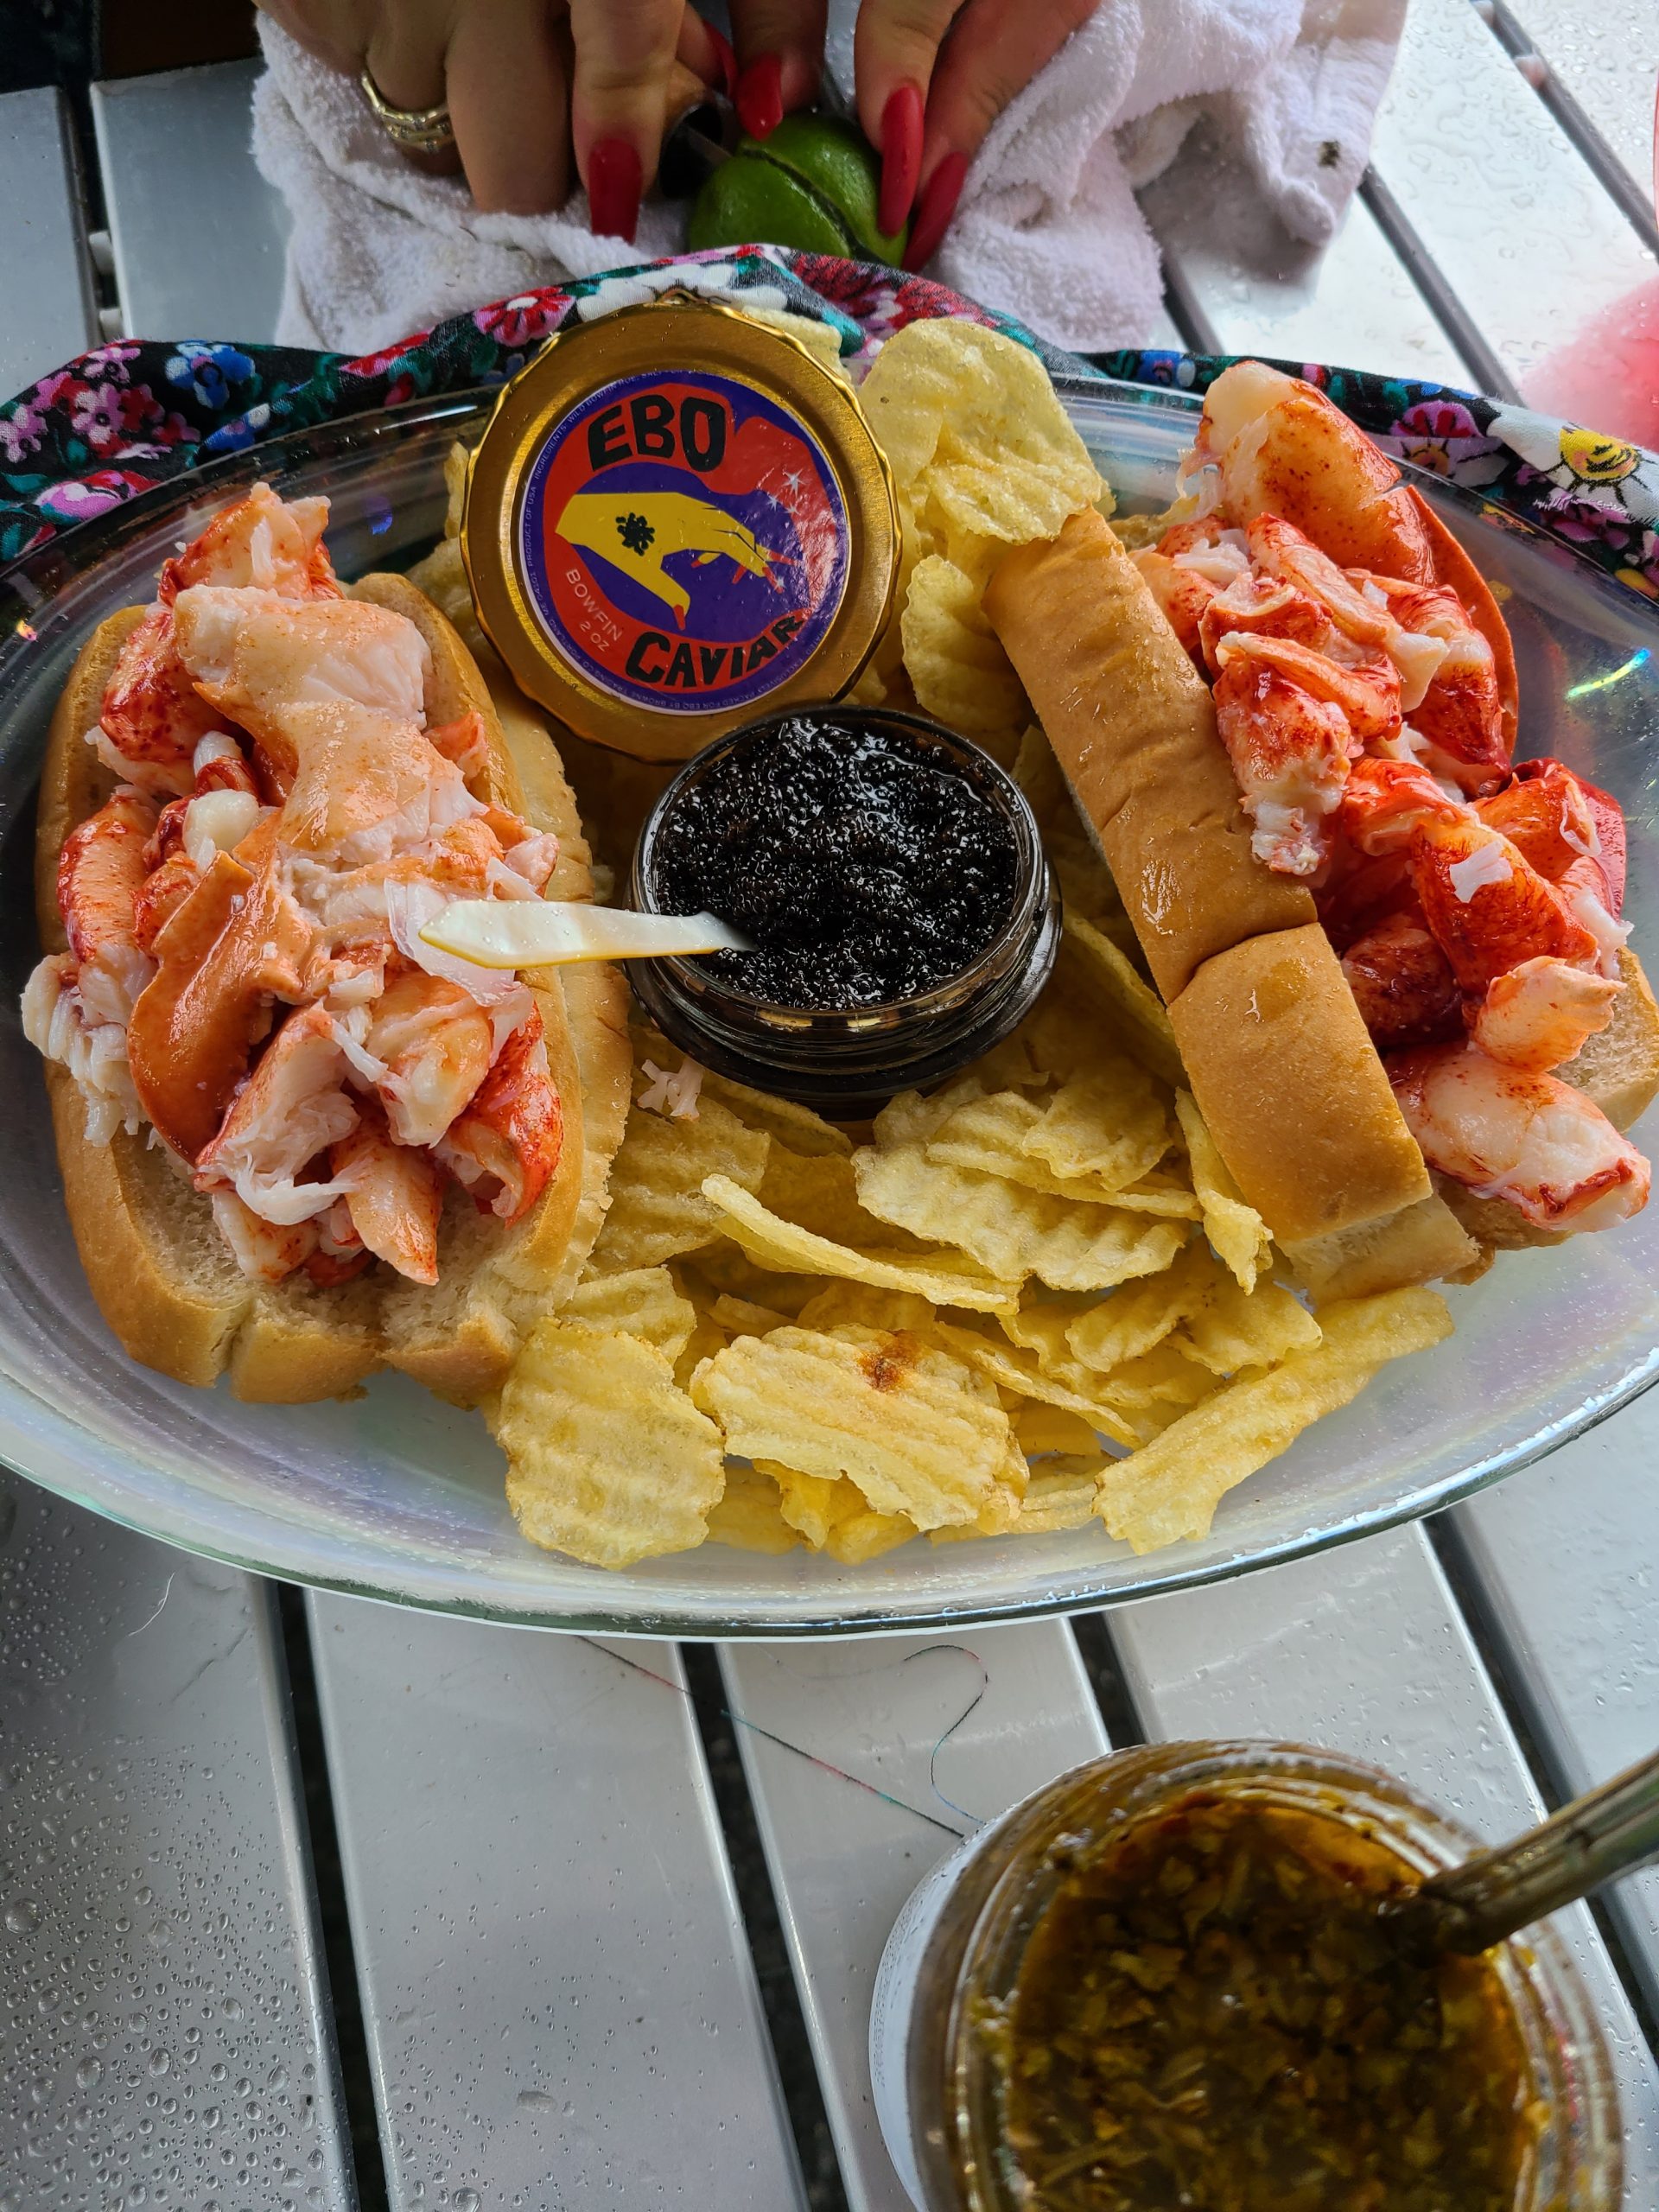 A plate of lobster rolls, chips, and caviar